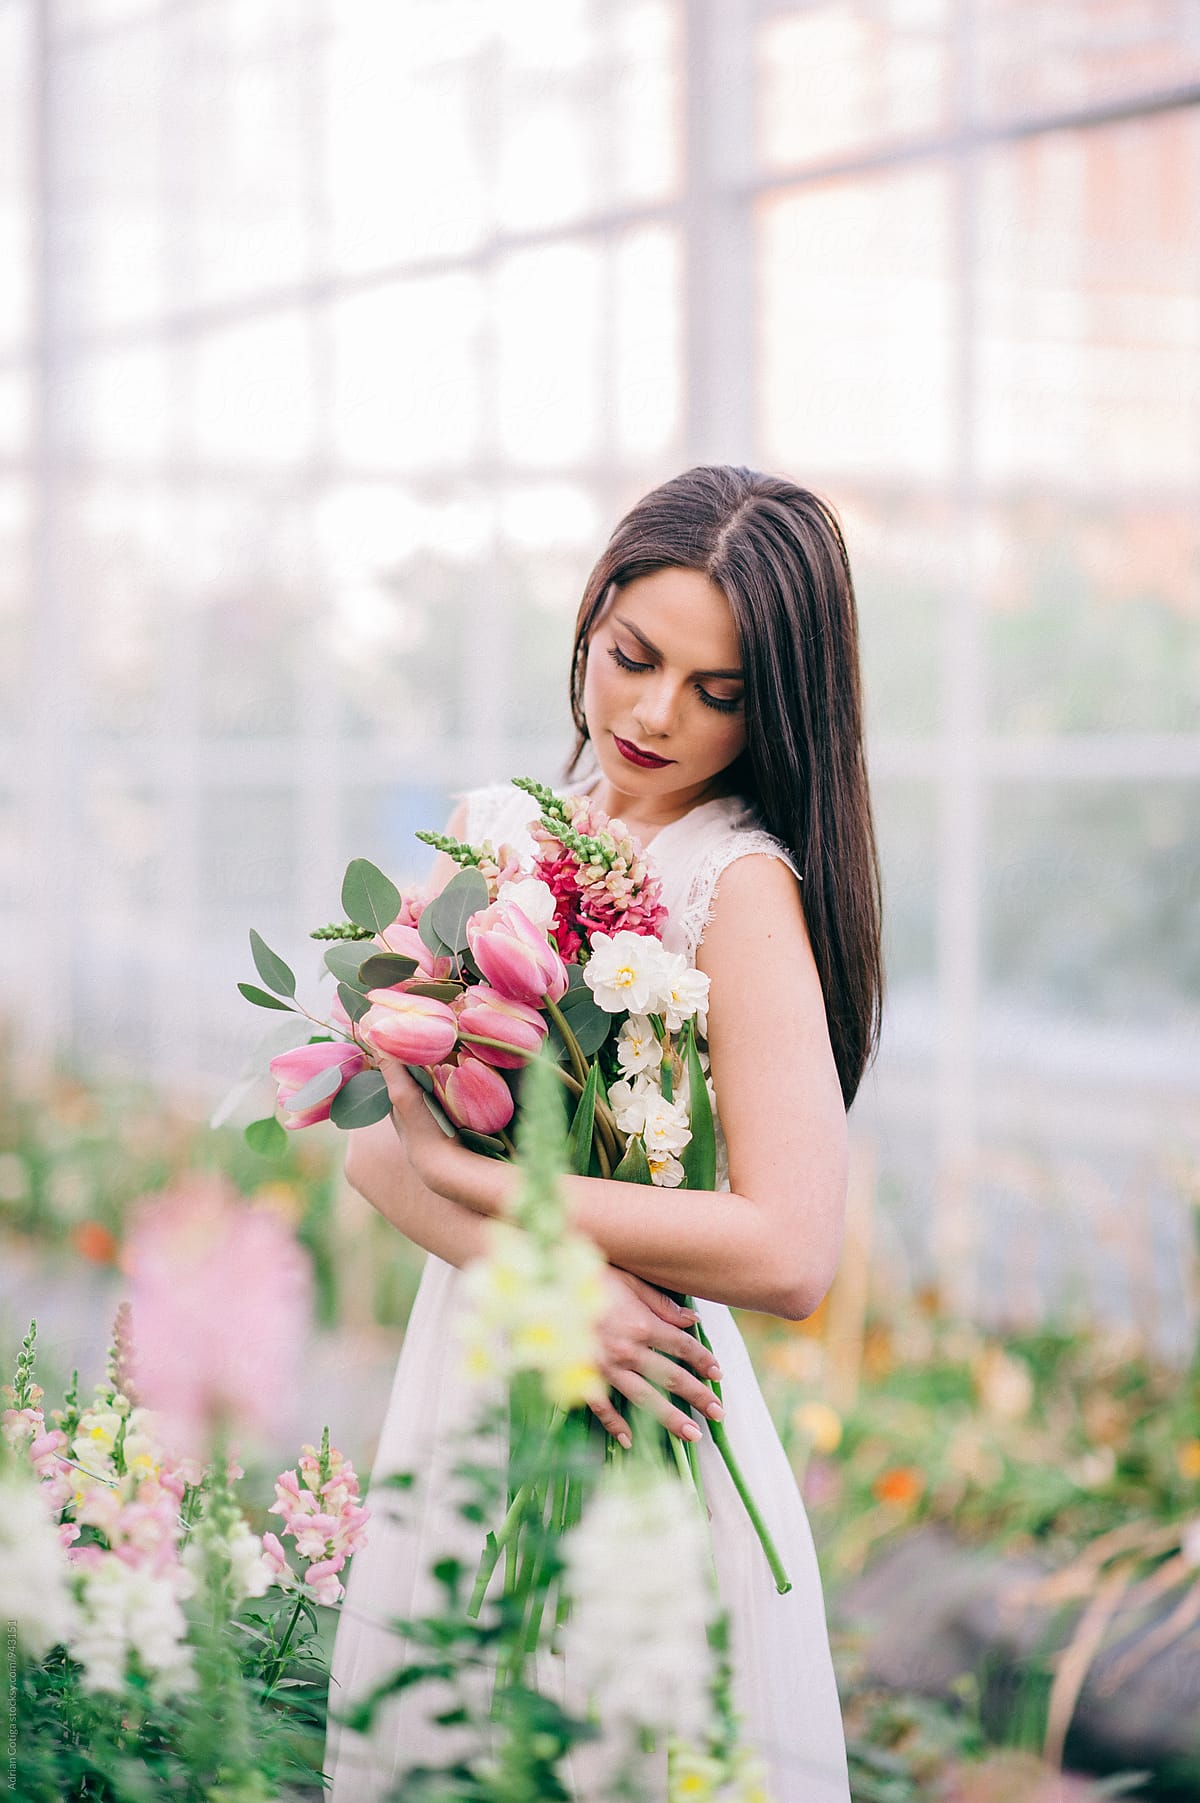 Young woman in a white dress holding flowers bouquet